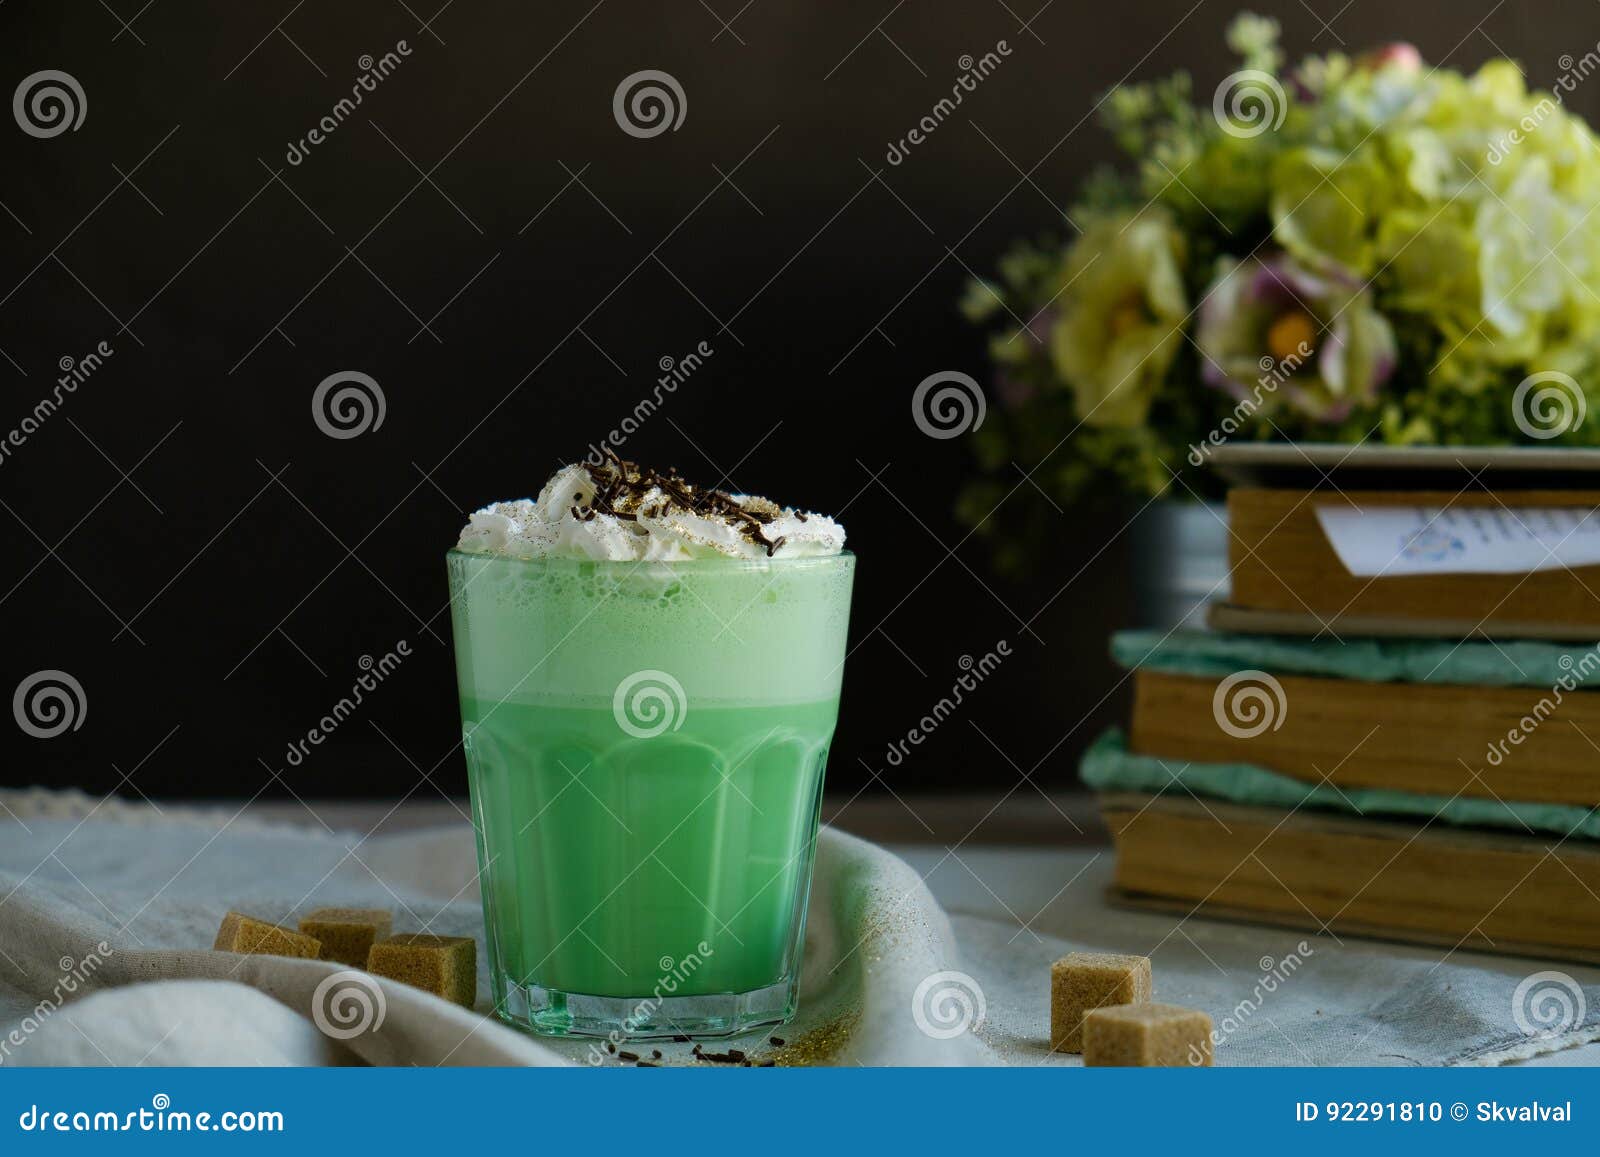 mint coffee with with cream and colorful decoration on dark background. milk shake, cocktaill, frappuccino. unicorn coffee, unico